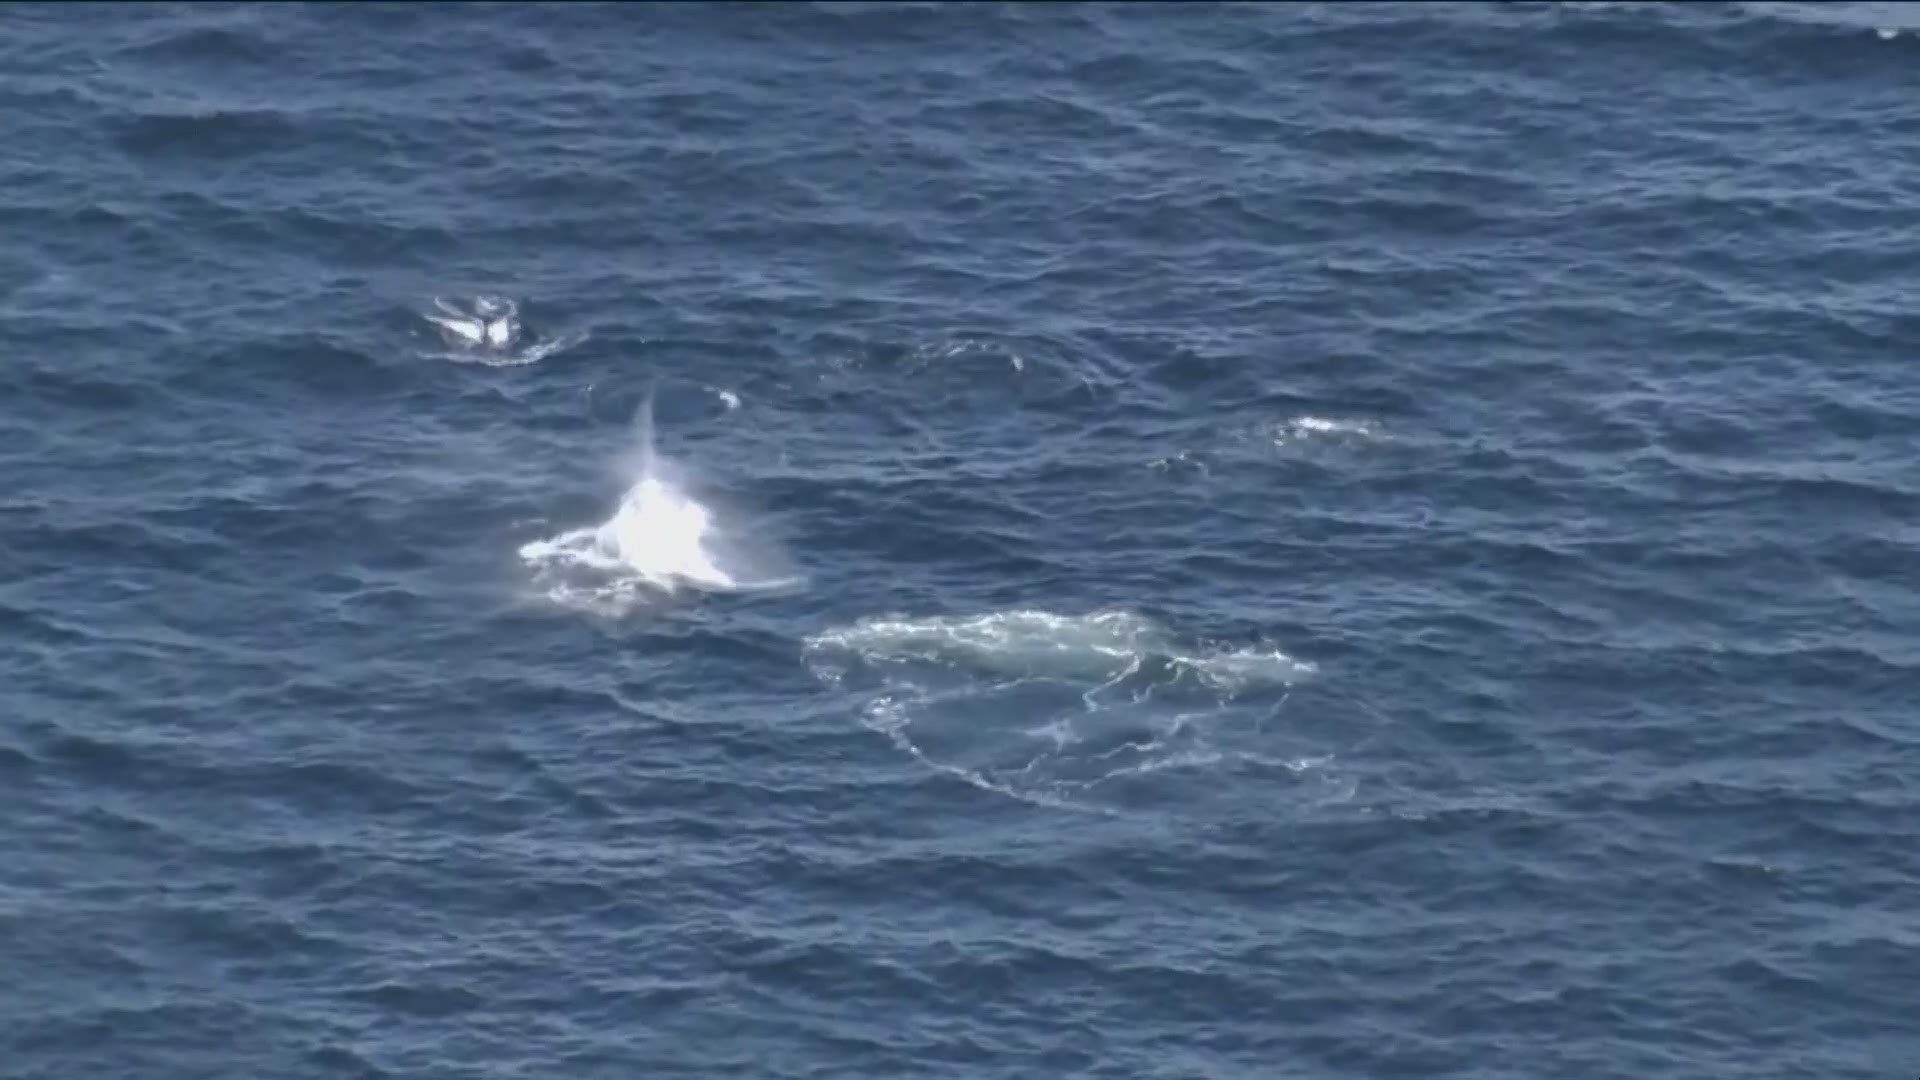 A pod of orcas was spotted traveling between Vashon Island and Fauntleroy in Puget Sound on Wednesday